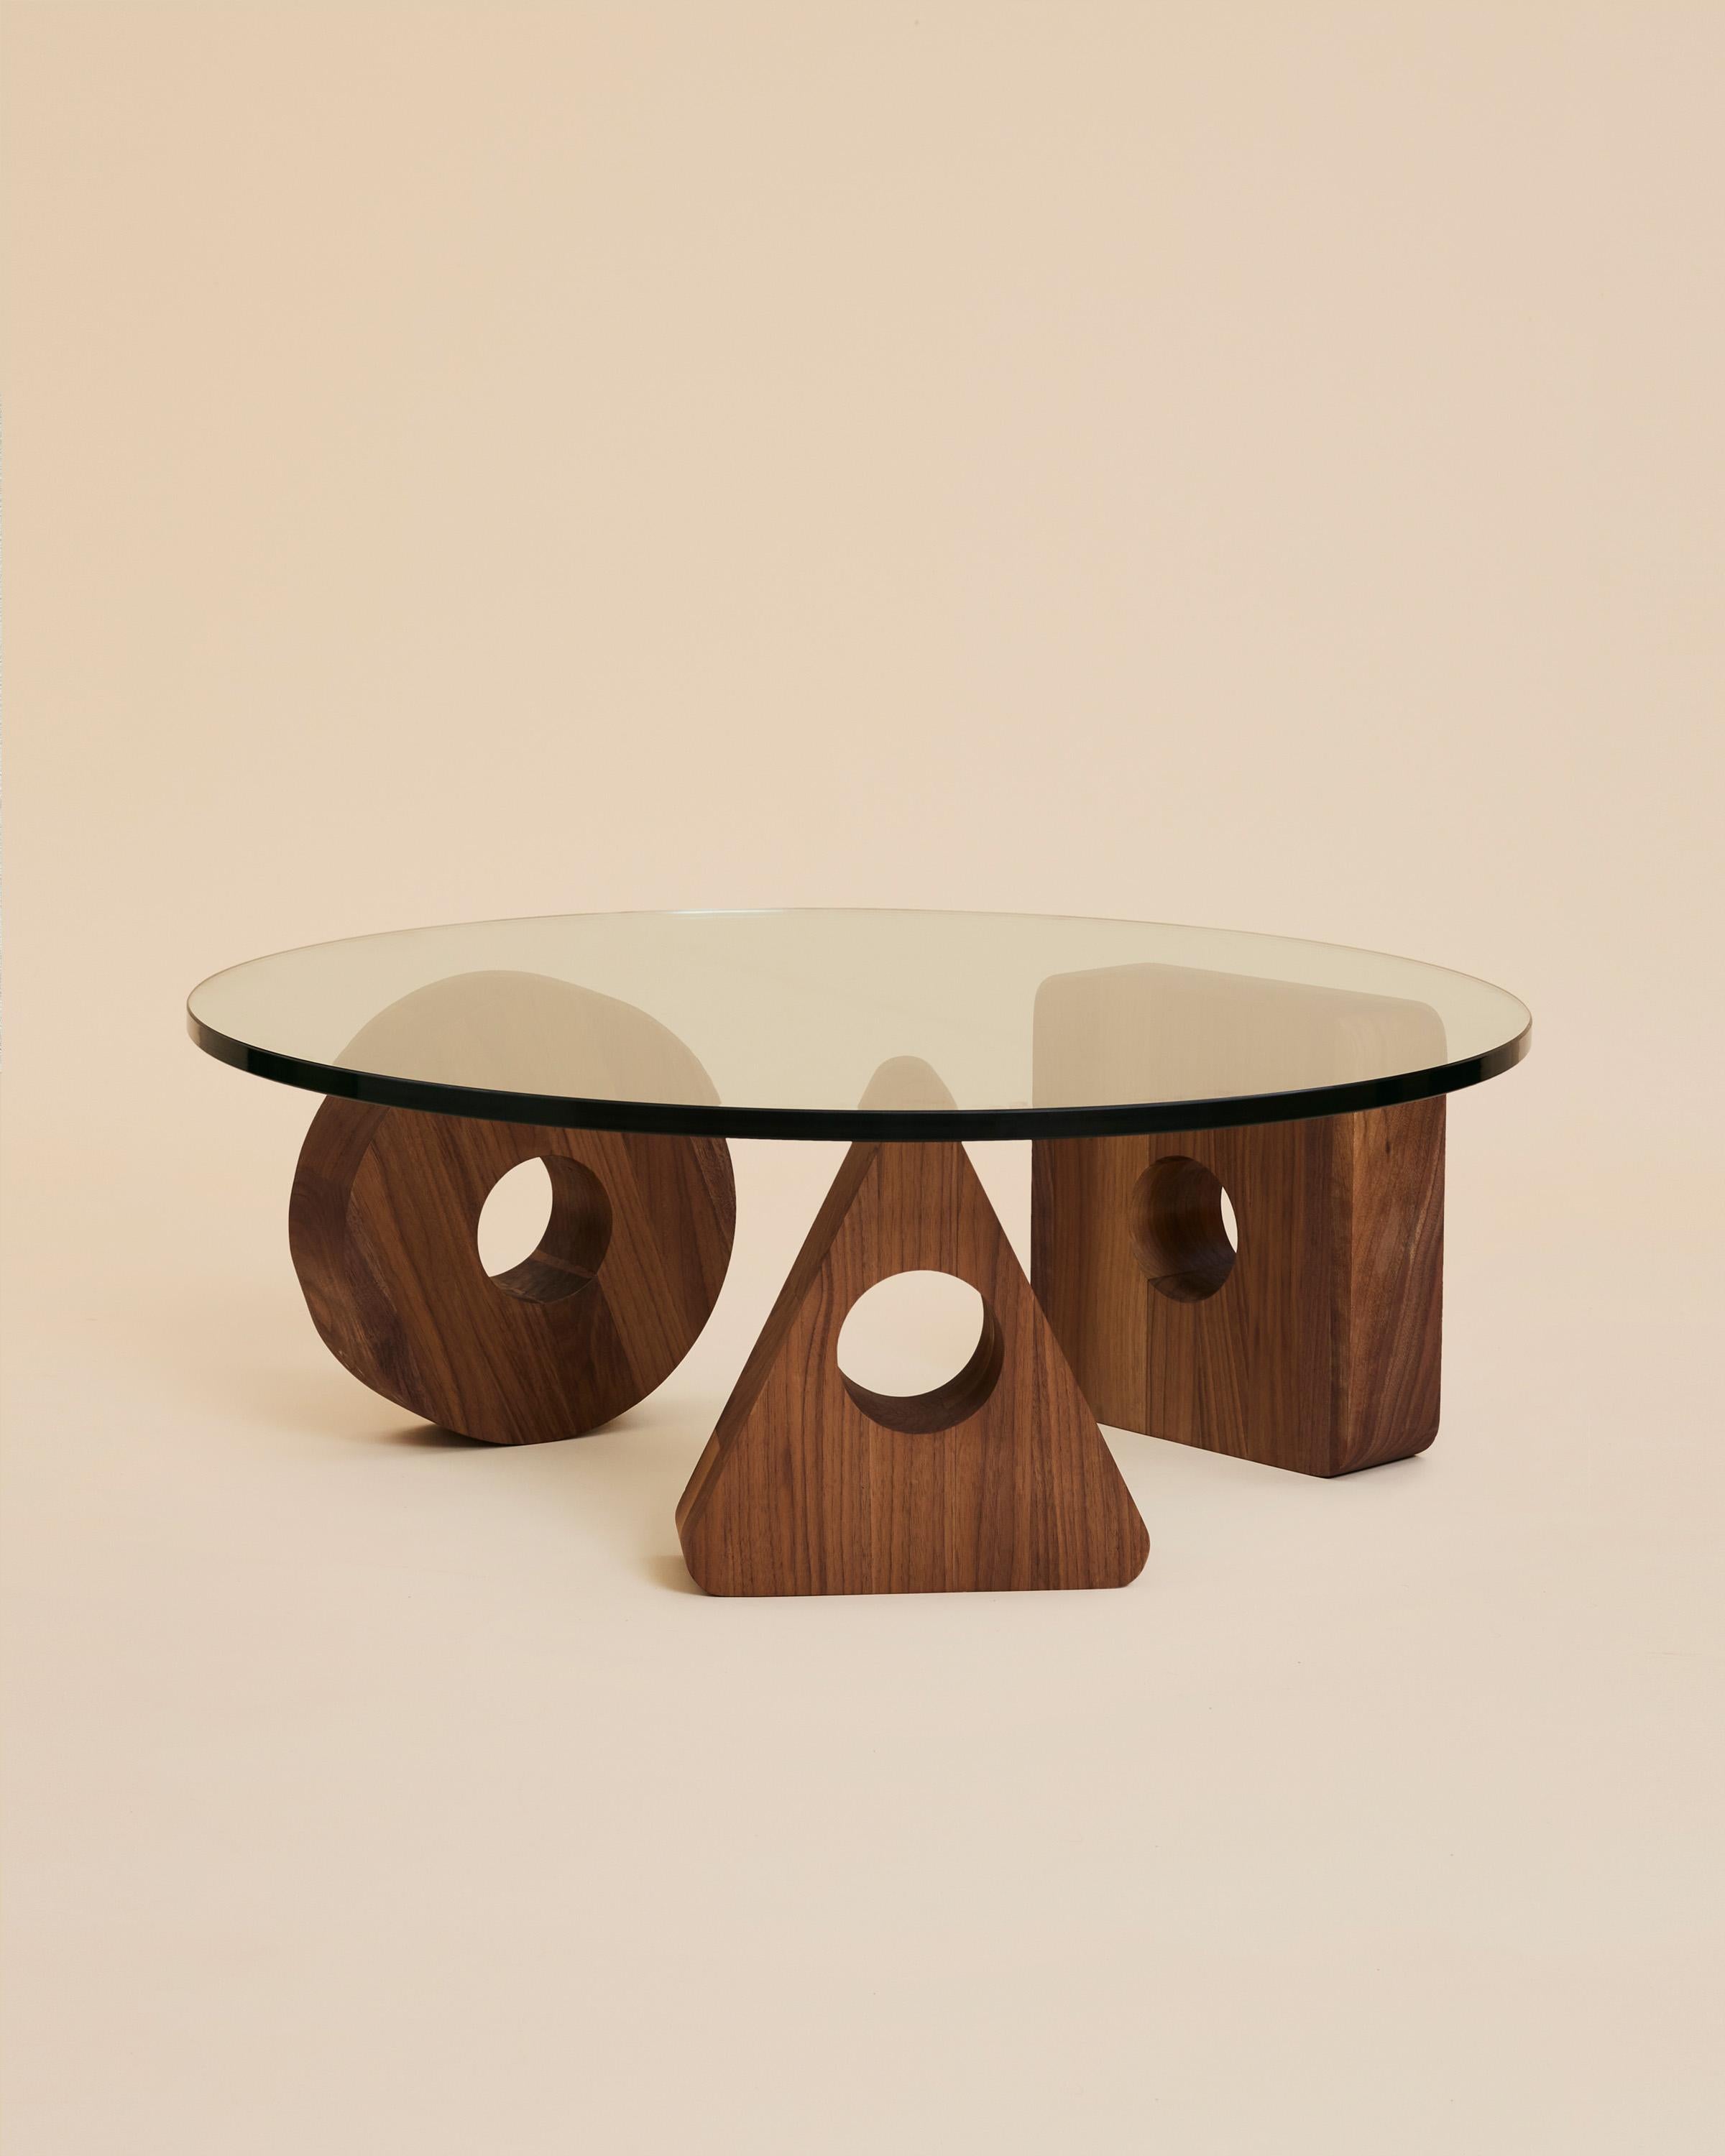 Meet Cosmo, the center of the ARJÉ furniture line. Revisiting the same symbolism as our walnut serving boards, this glass top coffee table rests on three hand cut walnut silhouettes, crafted by hand in Rochester, NY from black walnut harvested from